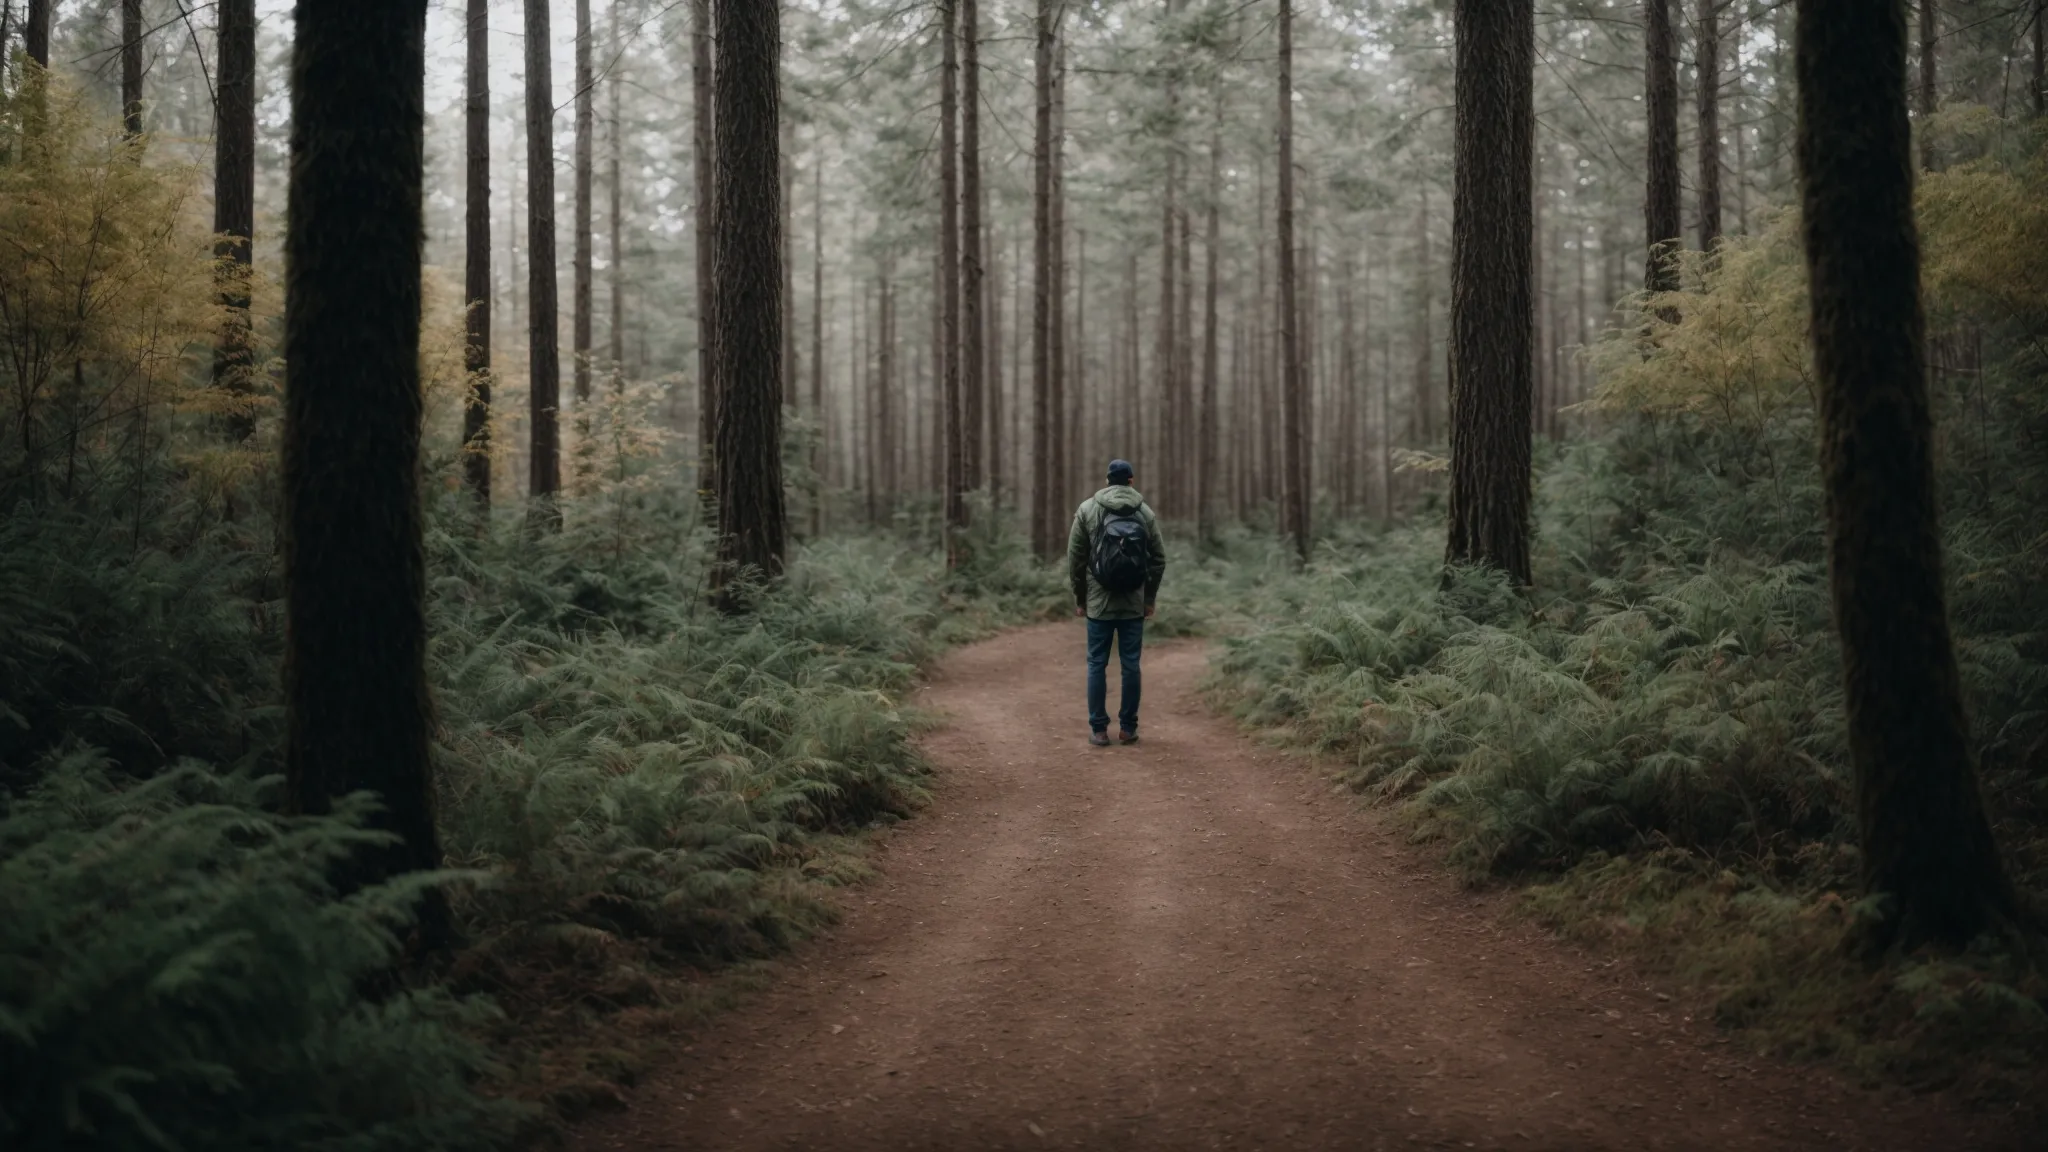 a person standing at a crossroads path in a forest, looking thoughtfully at distinct paths that lie ahead.